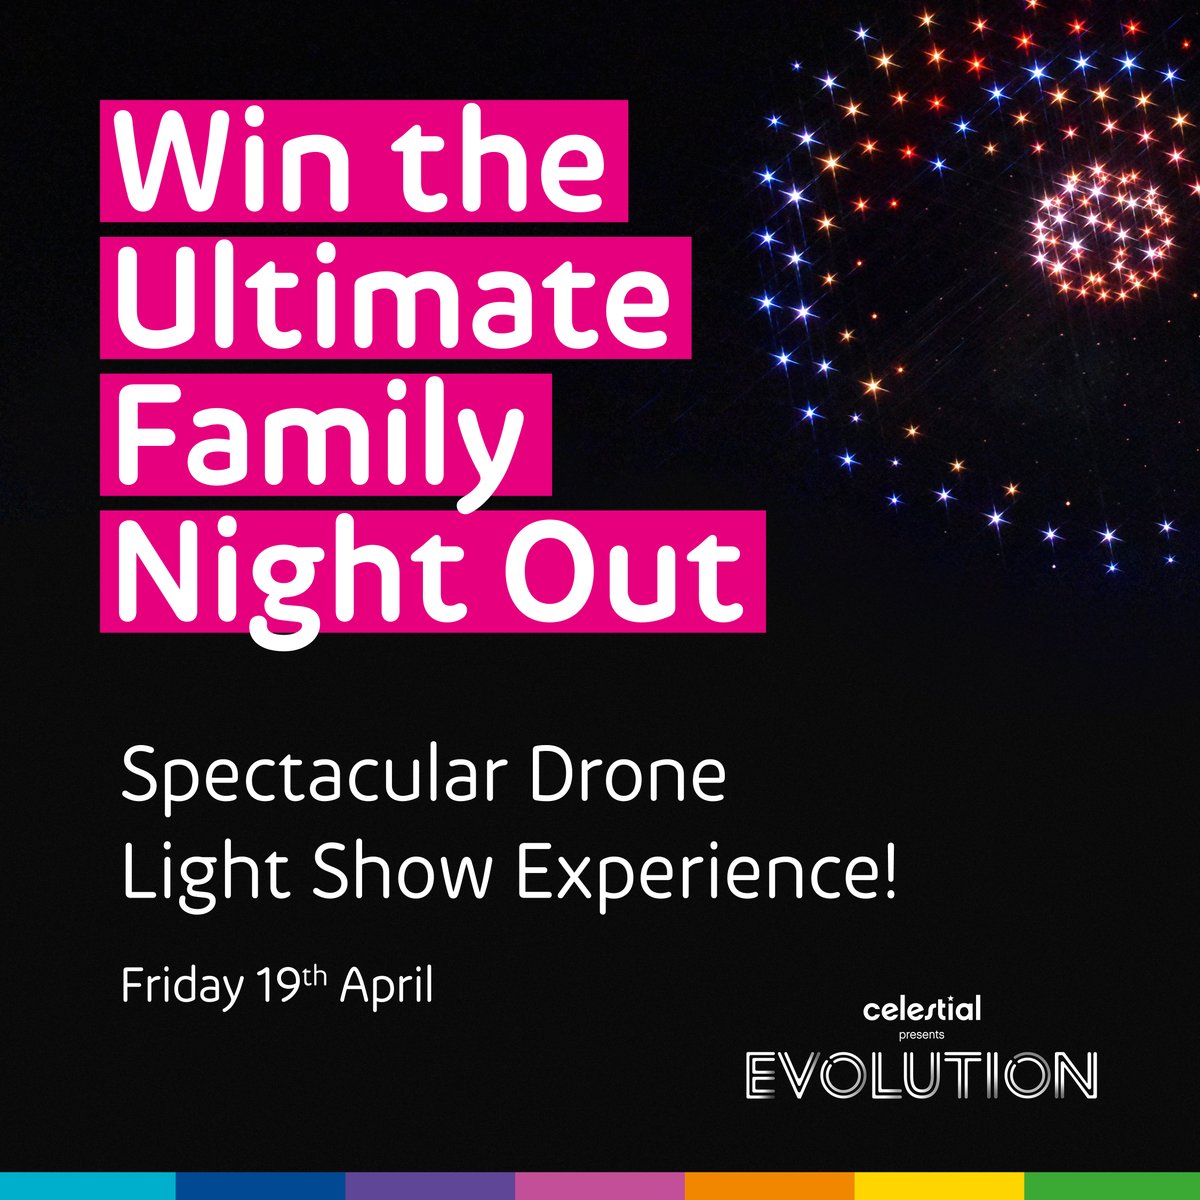 Competition Time: With the Ultimate Family Night Out! Enter now on our Instagram @victoriacentre, with a chance to win free parking, 4 tickets to the Evolution drone show plus dinner at Ed's Easy Diner. Good Luck!